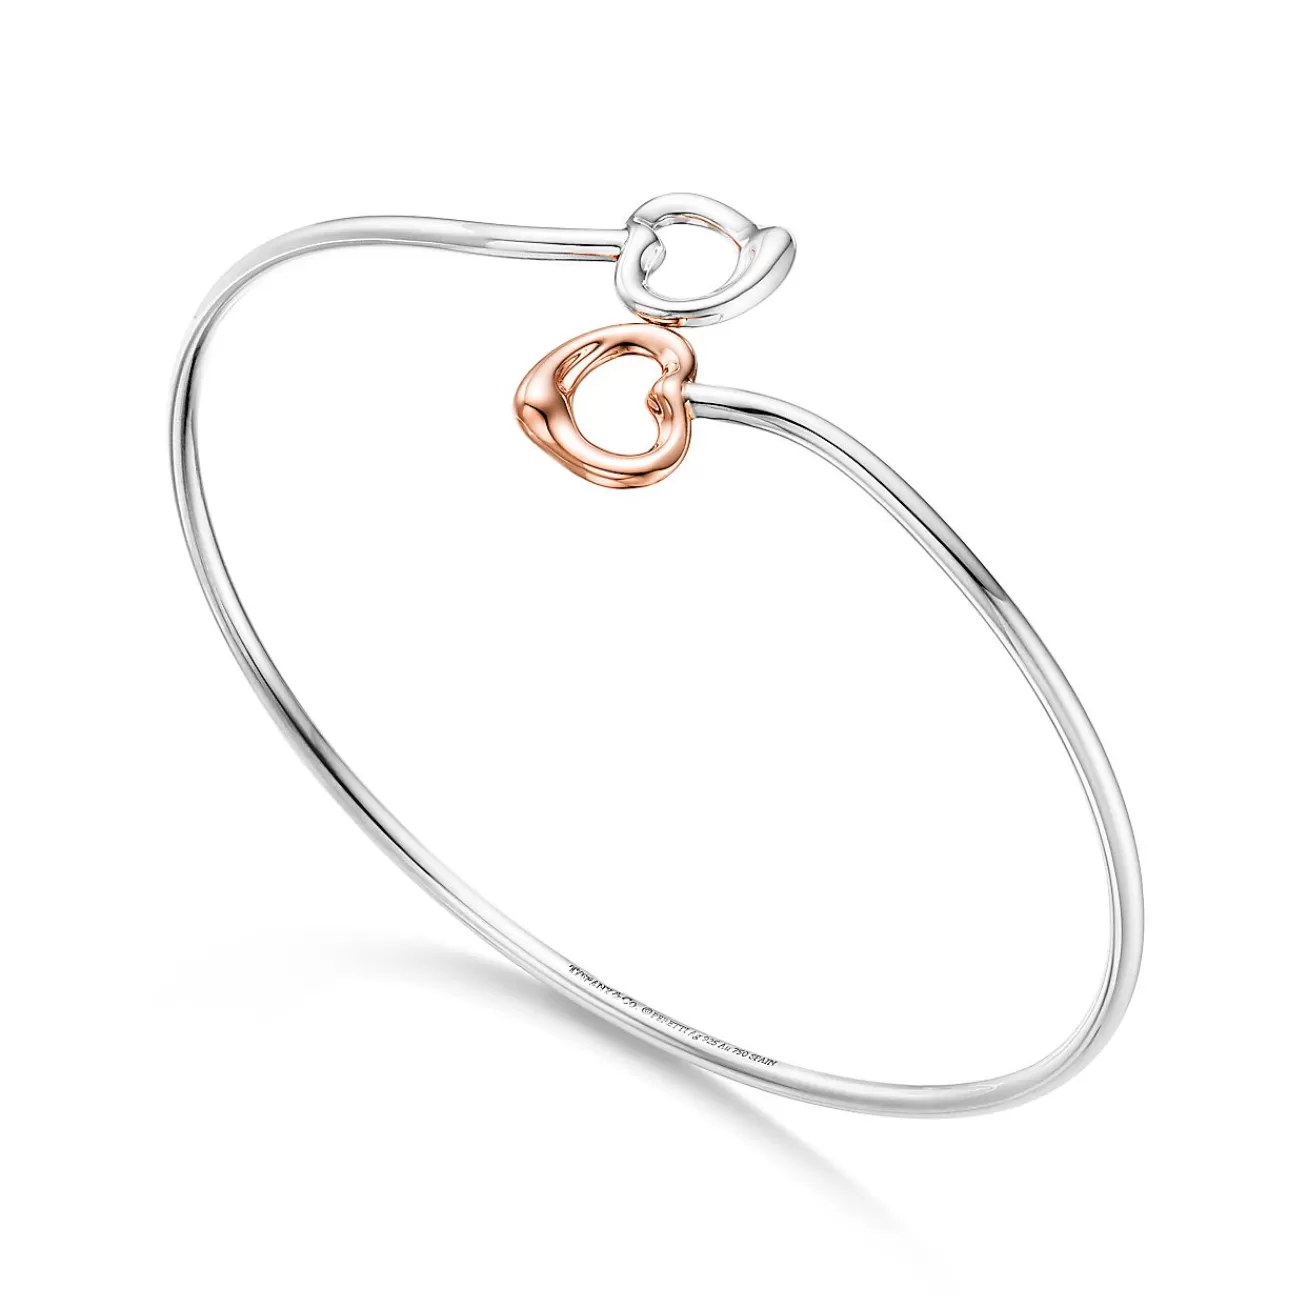 Tiffany & Co. Elsa Peretti® Double Open Heart bangle in silver and 18k rose gold, medium. | ^ Bracelets | Rose Gold Jewelry